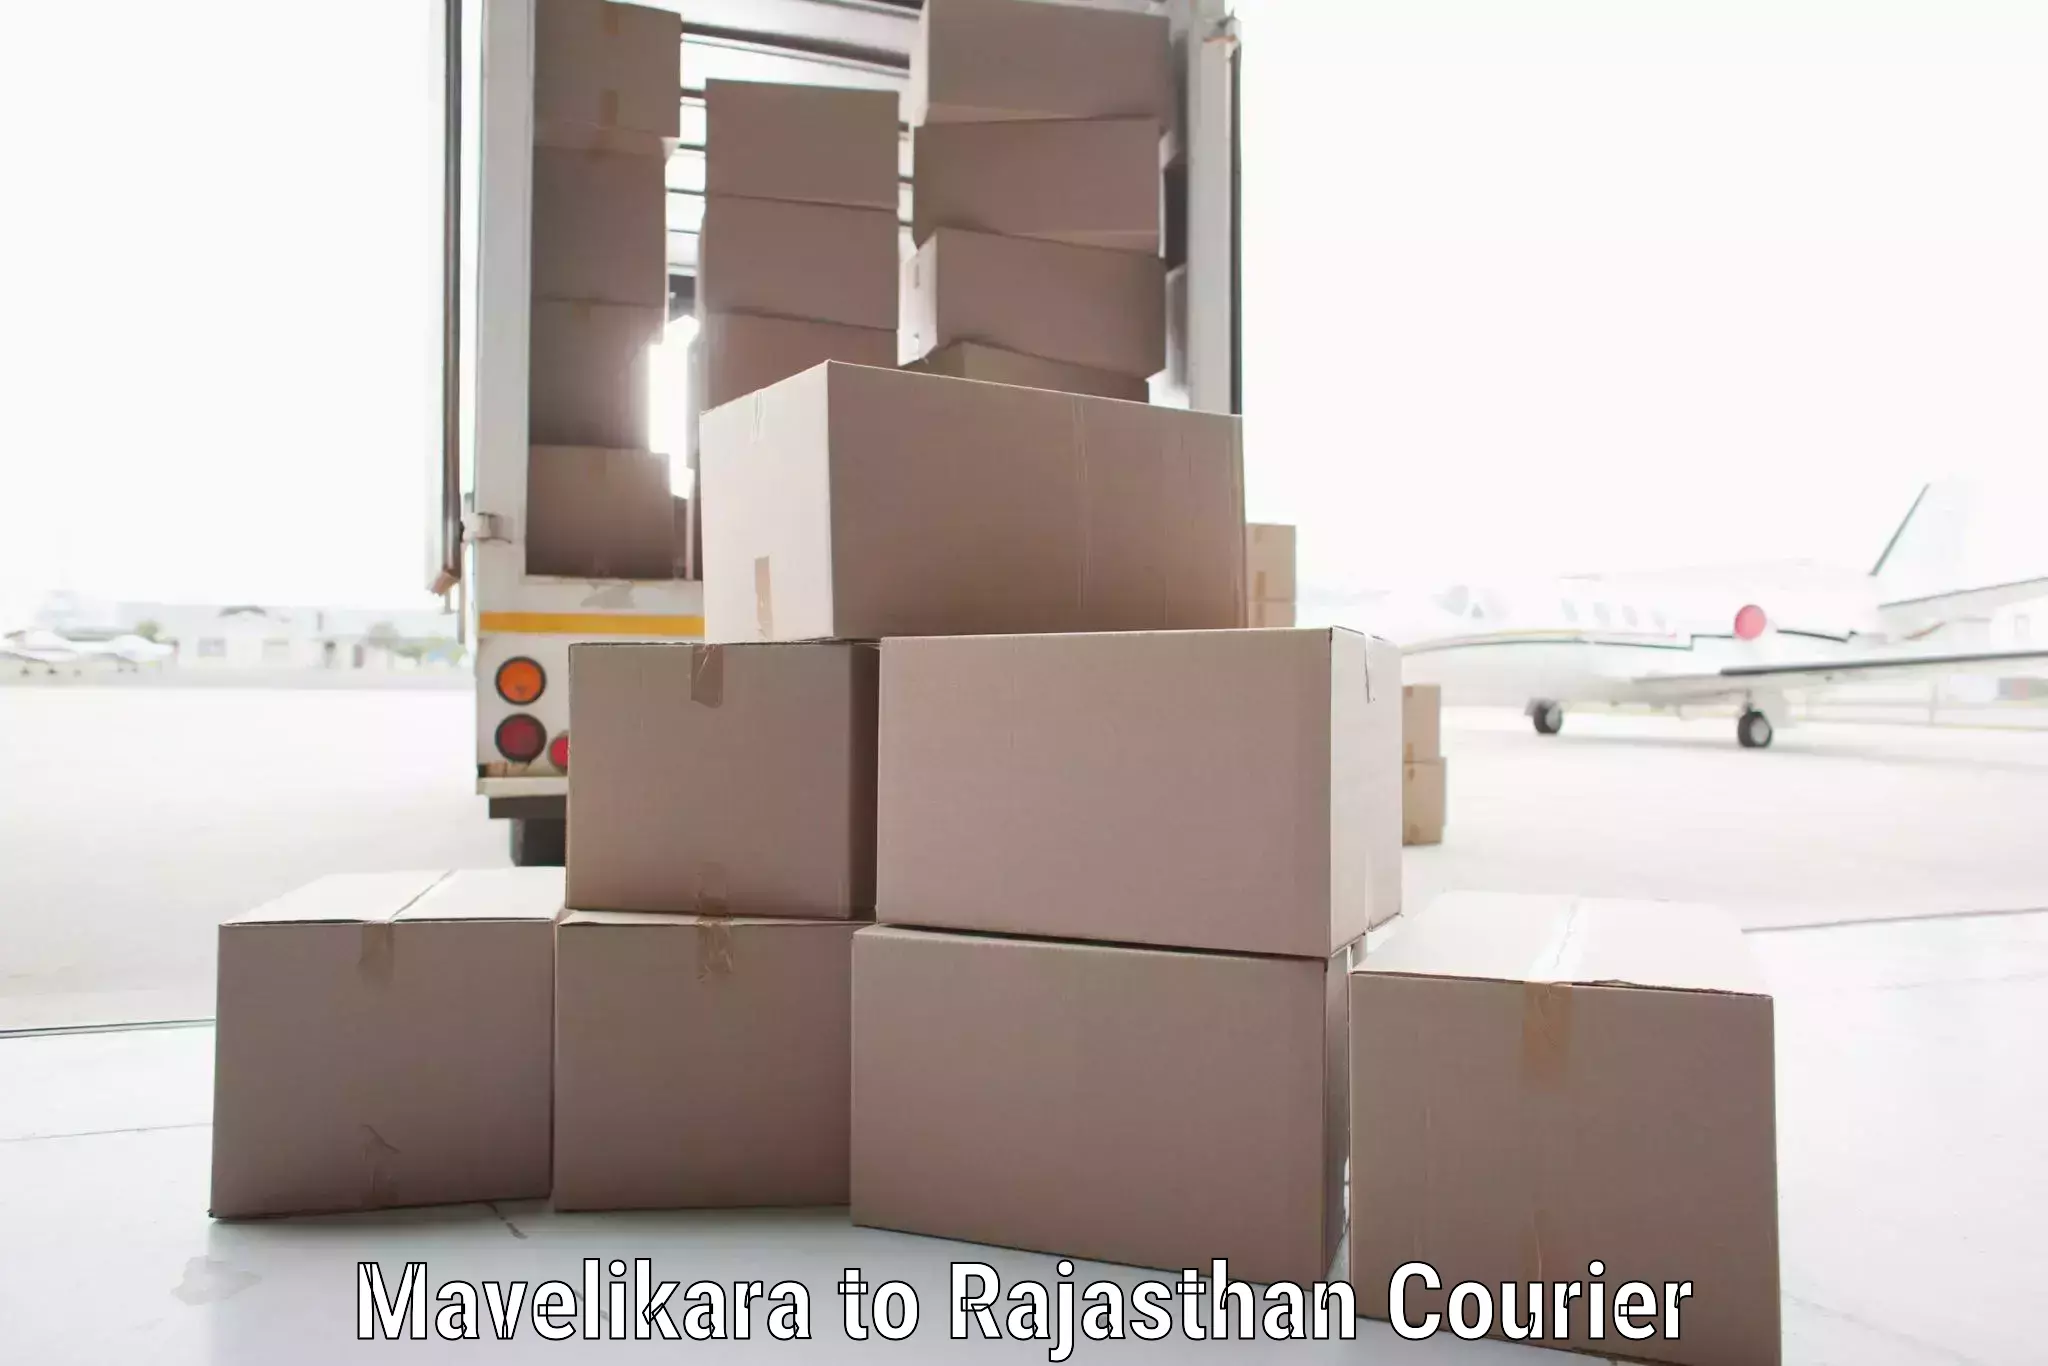 Flexible delivery schedules Mavelikara to Rajasthan